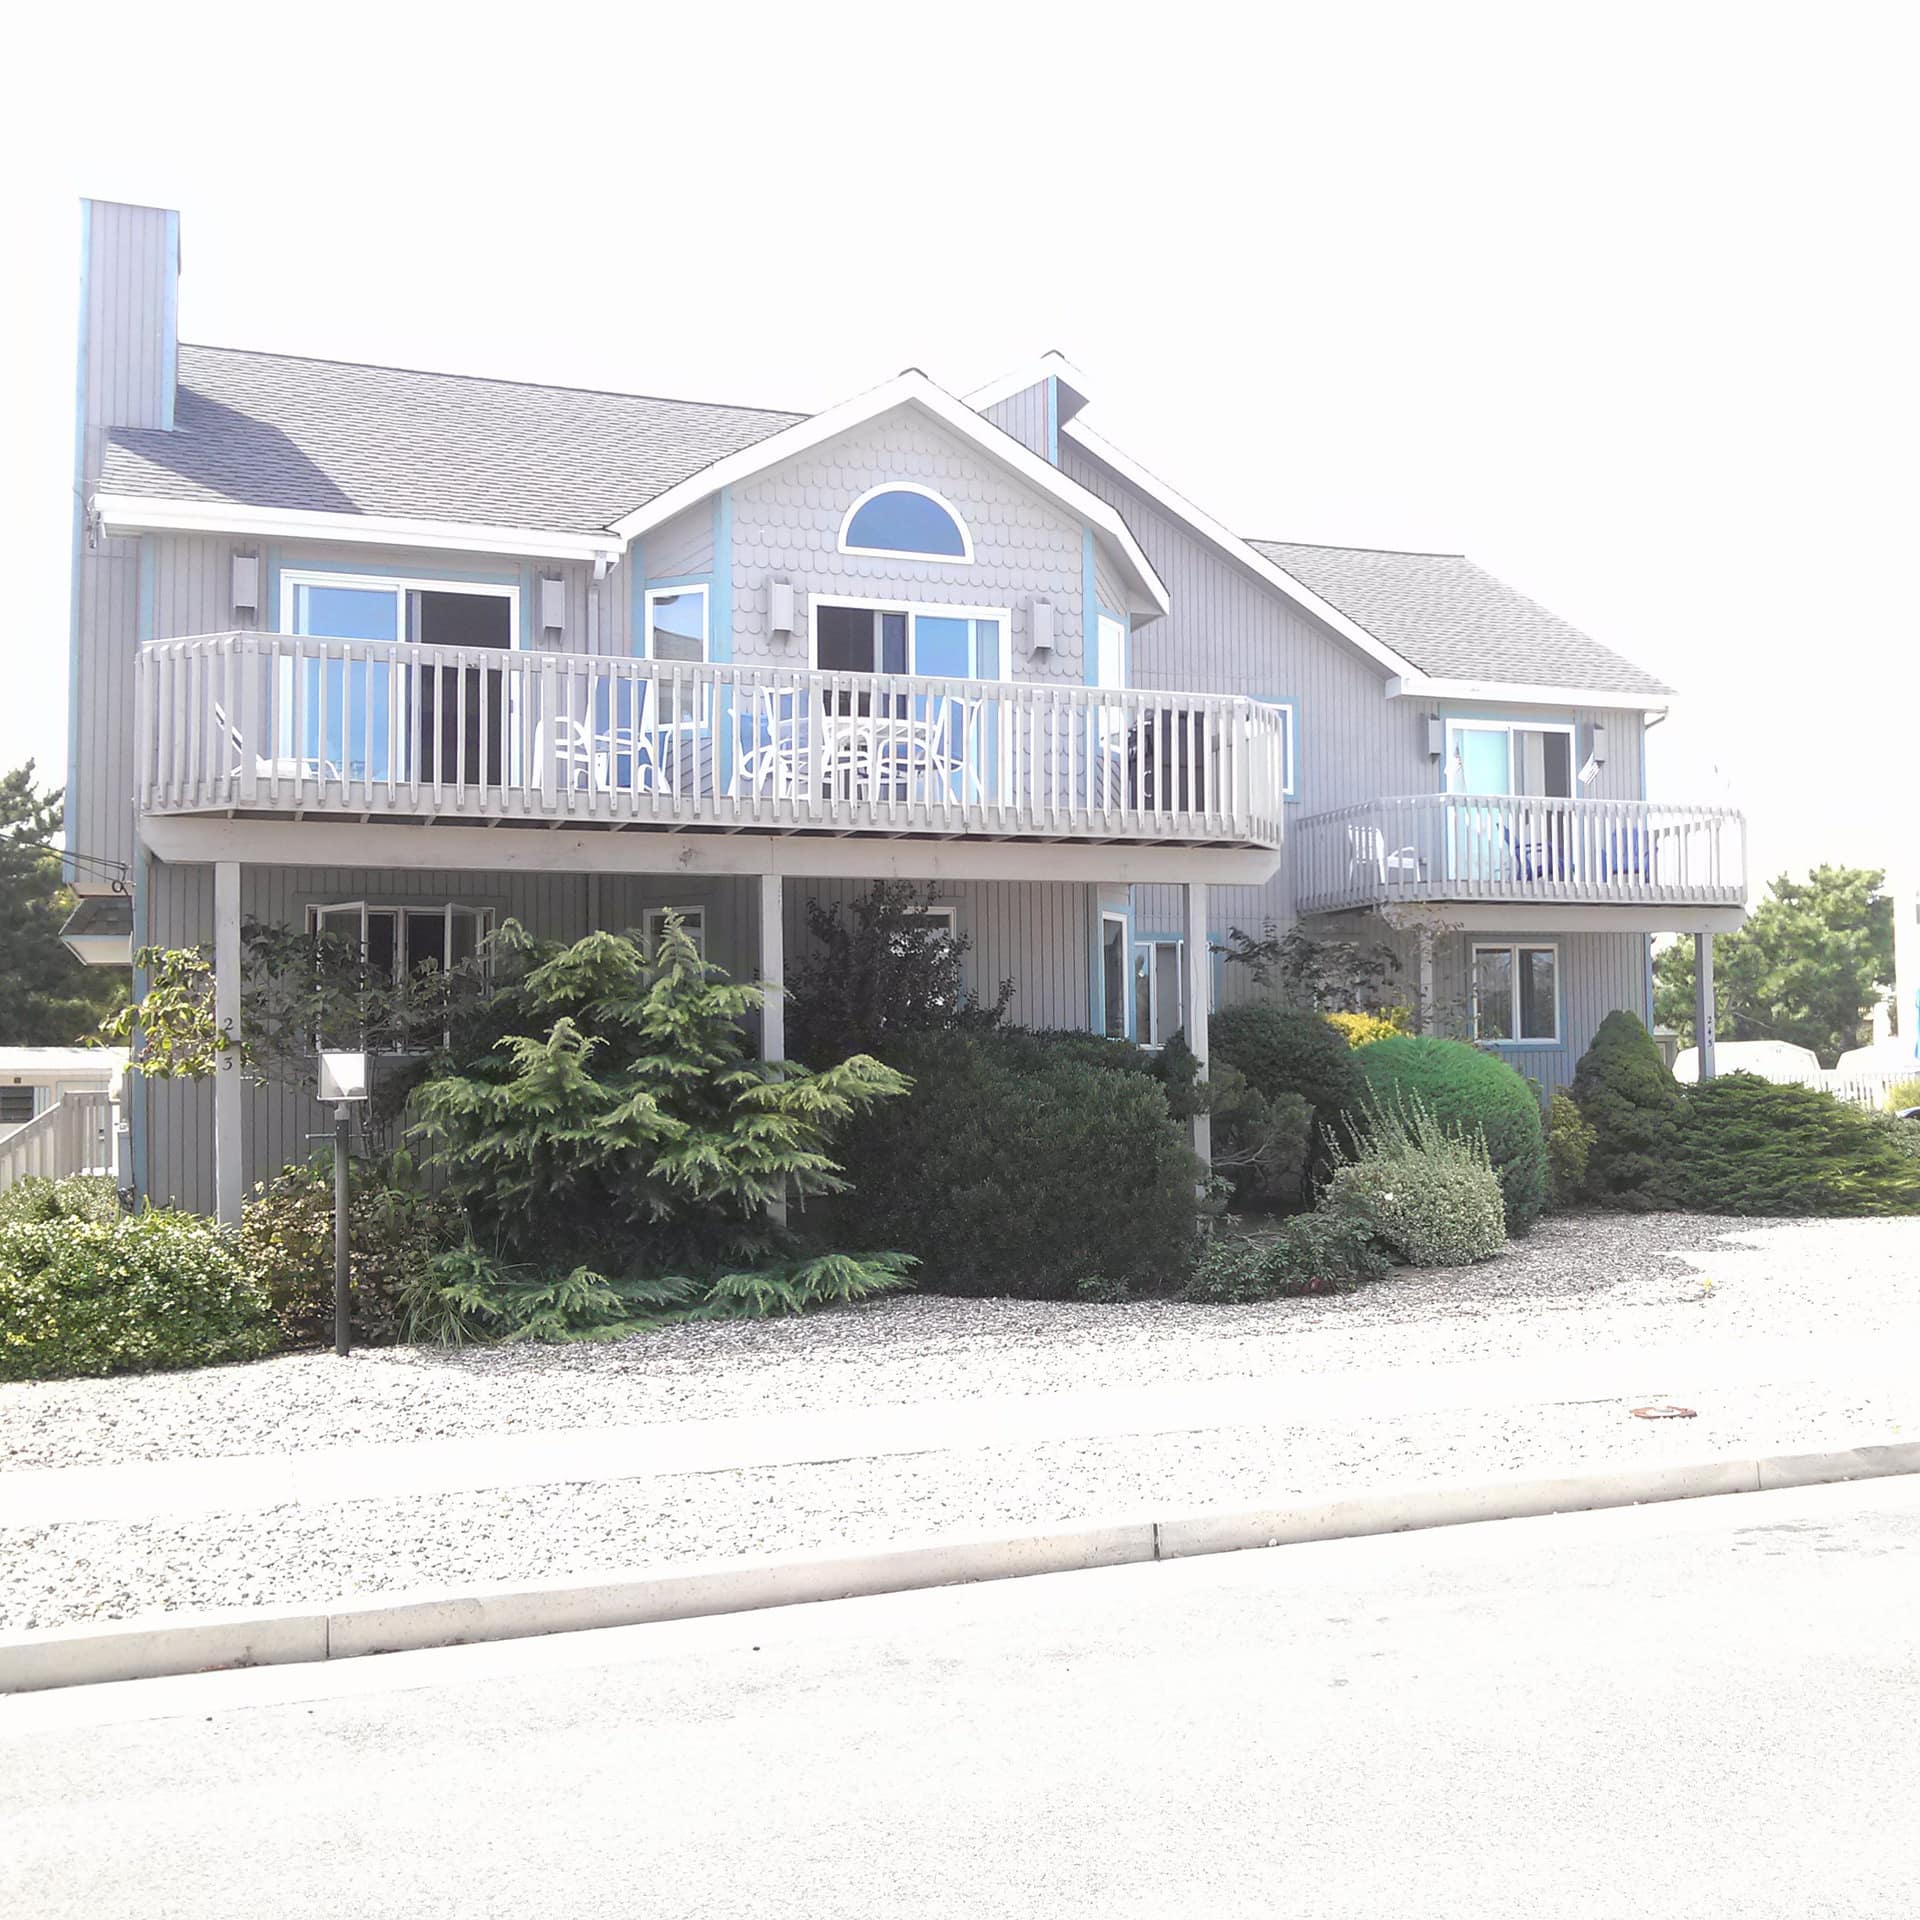 A four-bedroom townhouse vacation rental in Stone Harbor, NJ